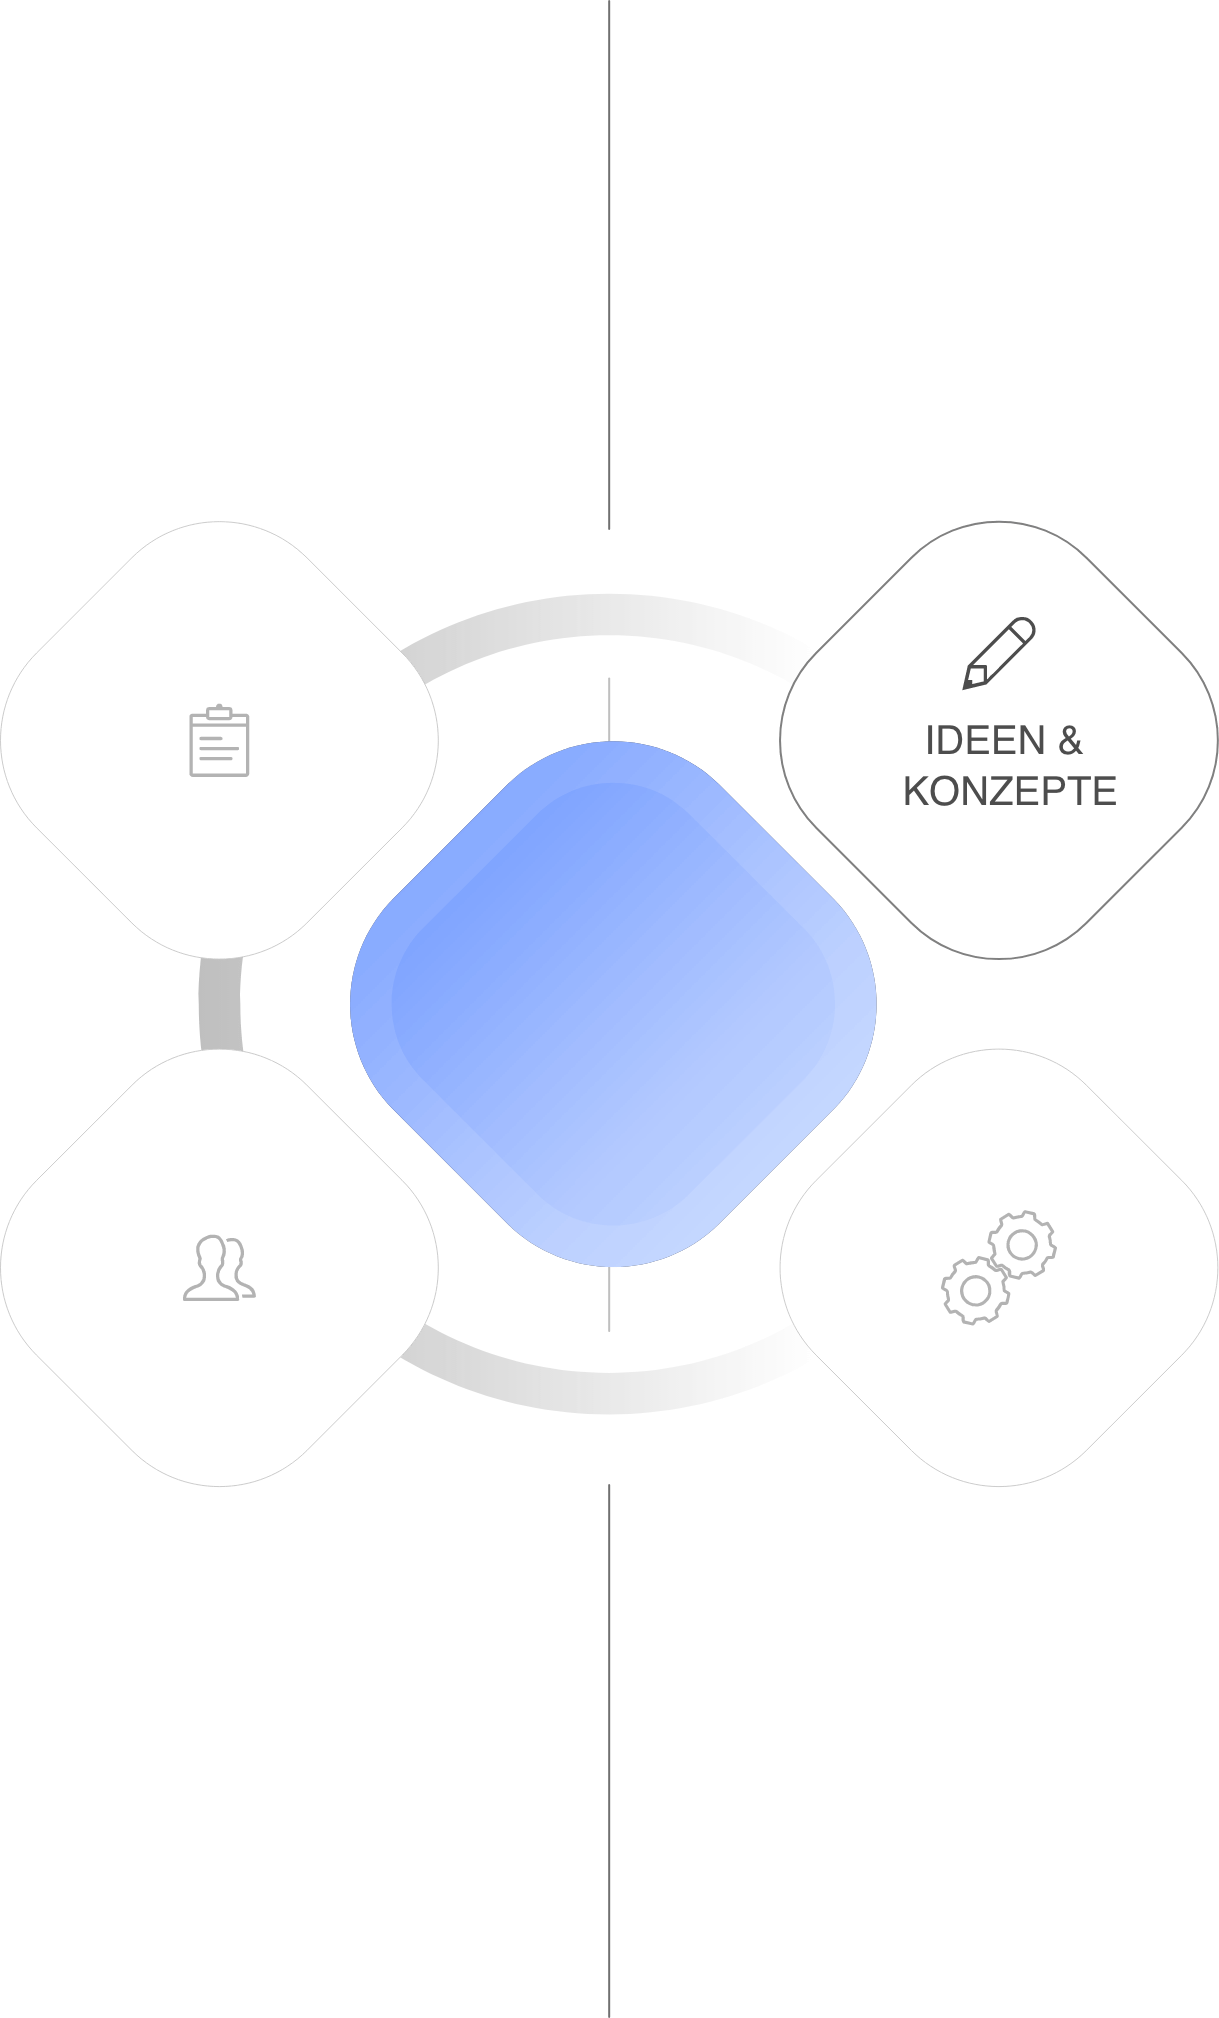 Usability Engineering - Services - Innovation - Konzepte - USE-Ing.